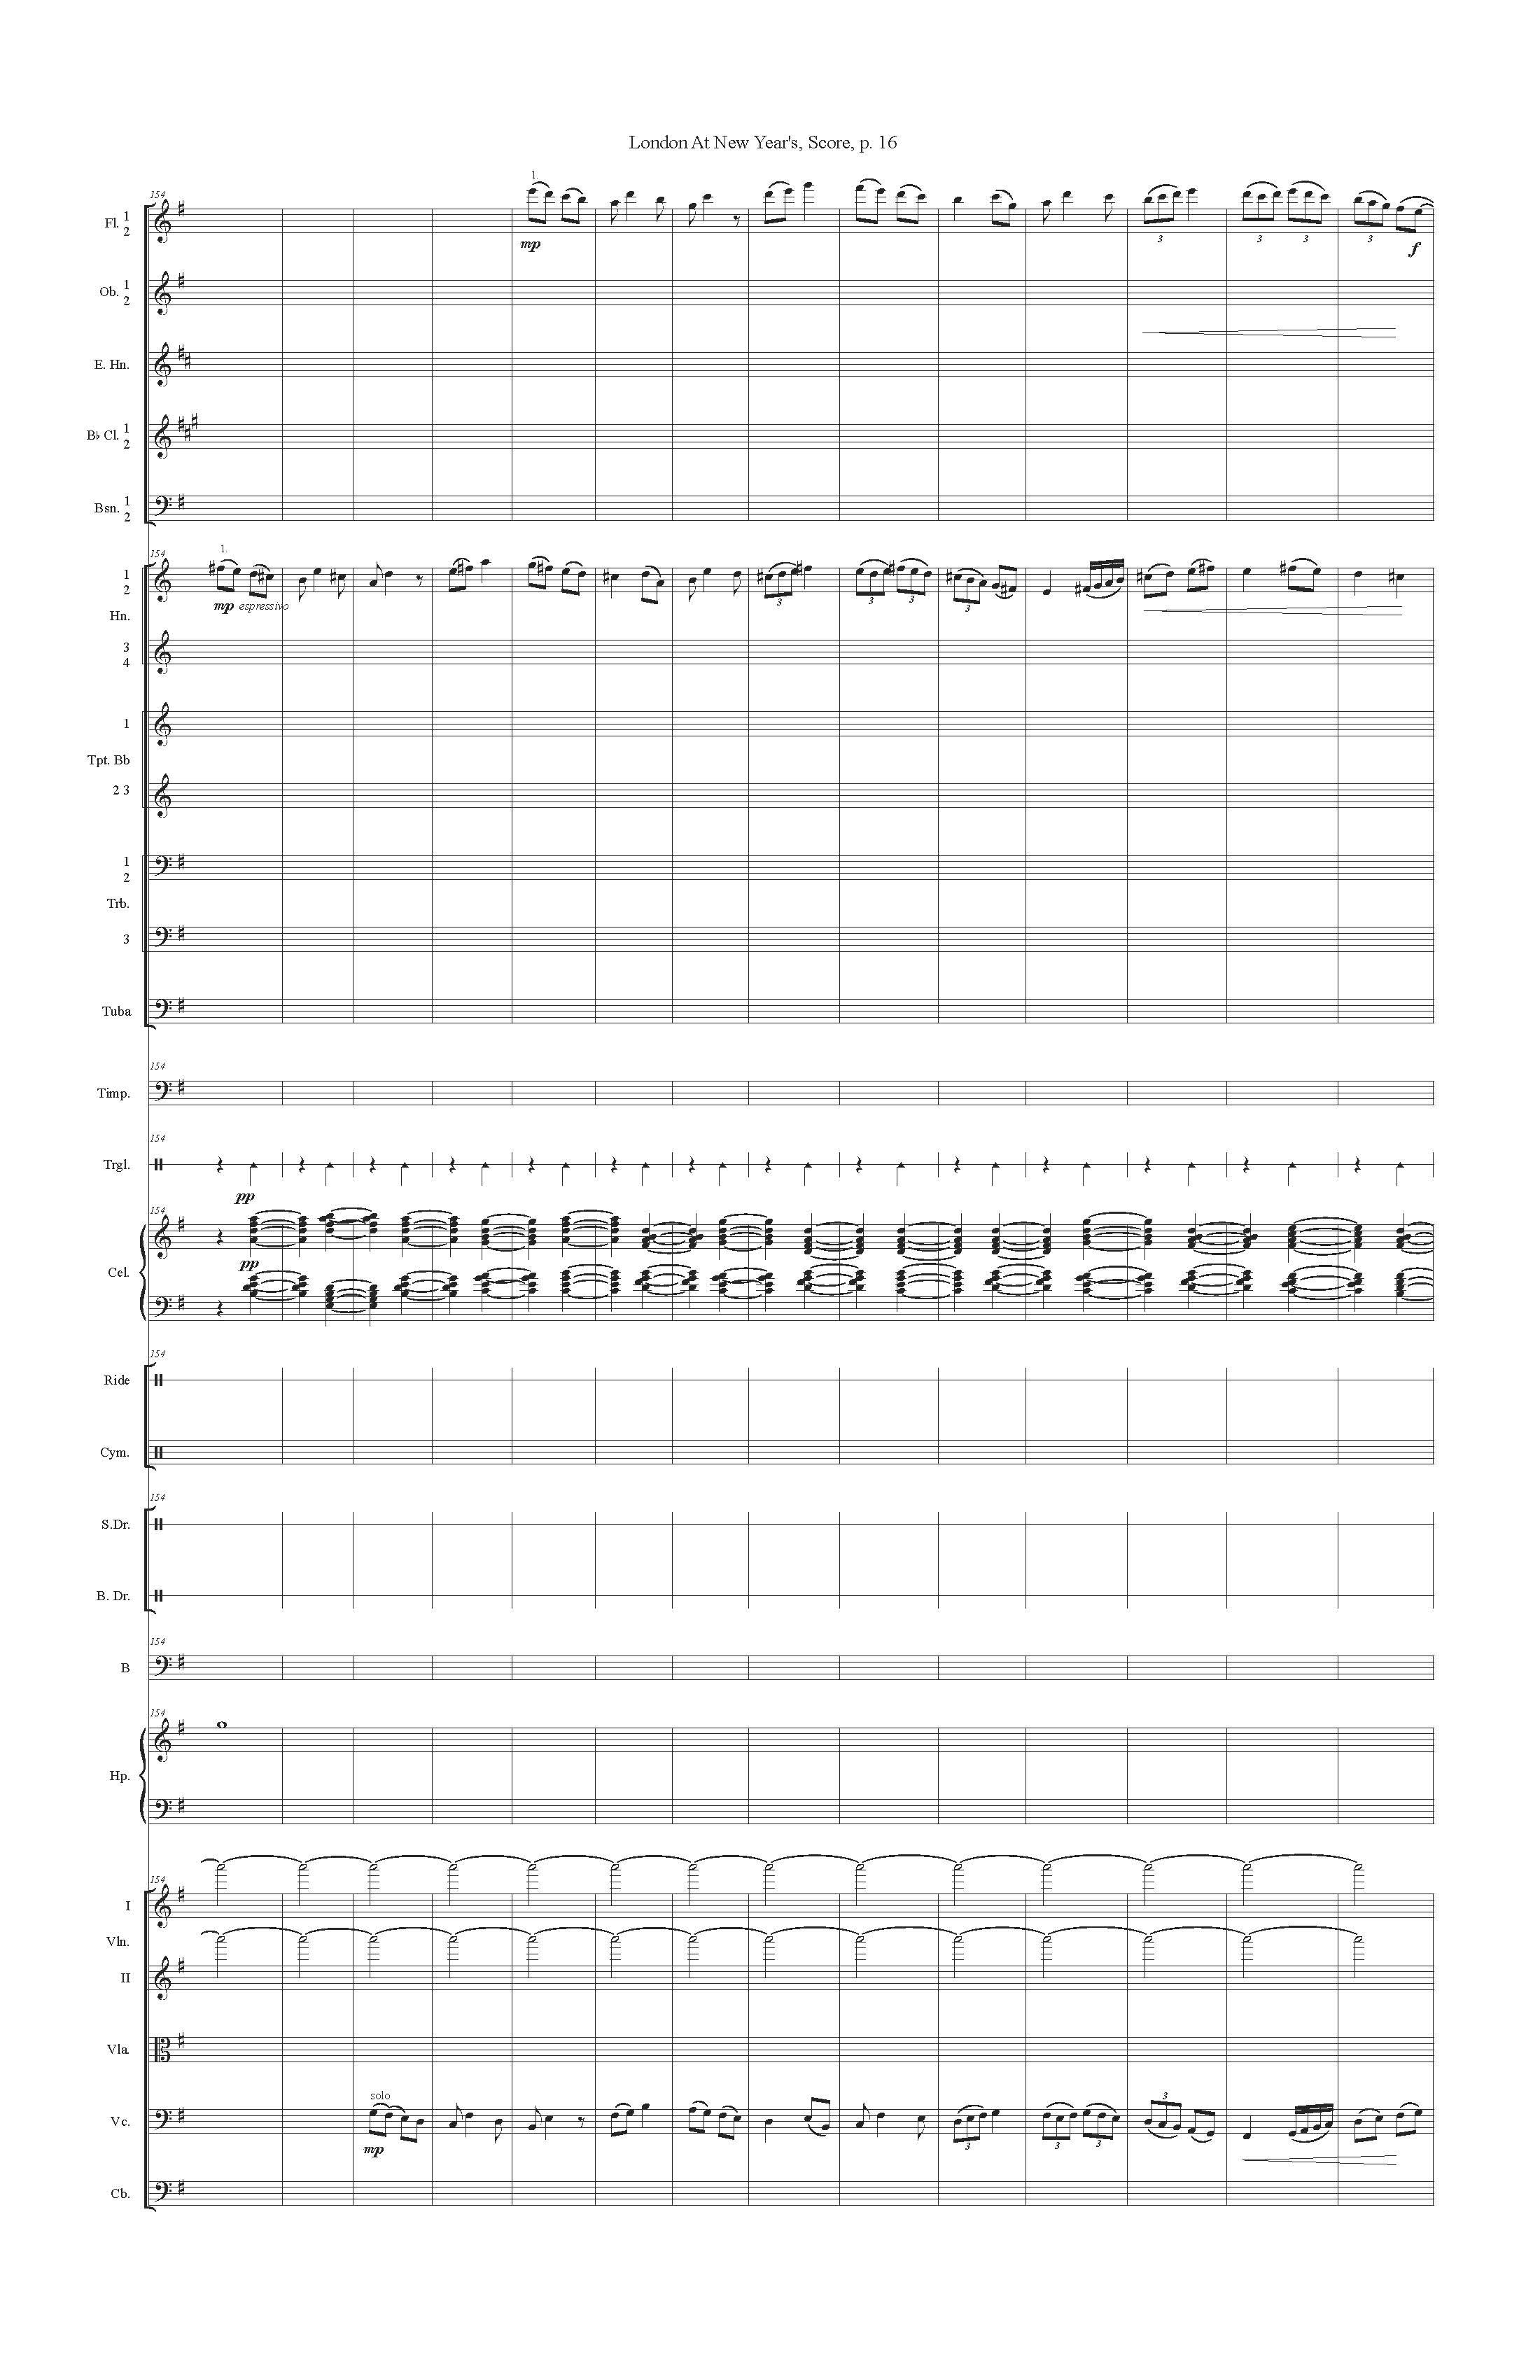 LONDON AT NEW YEARS ORCH - Score_Page_16.jpg